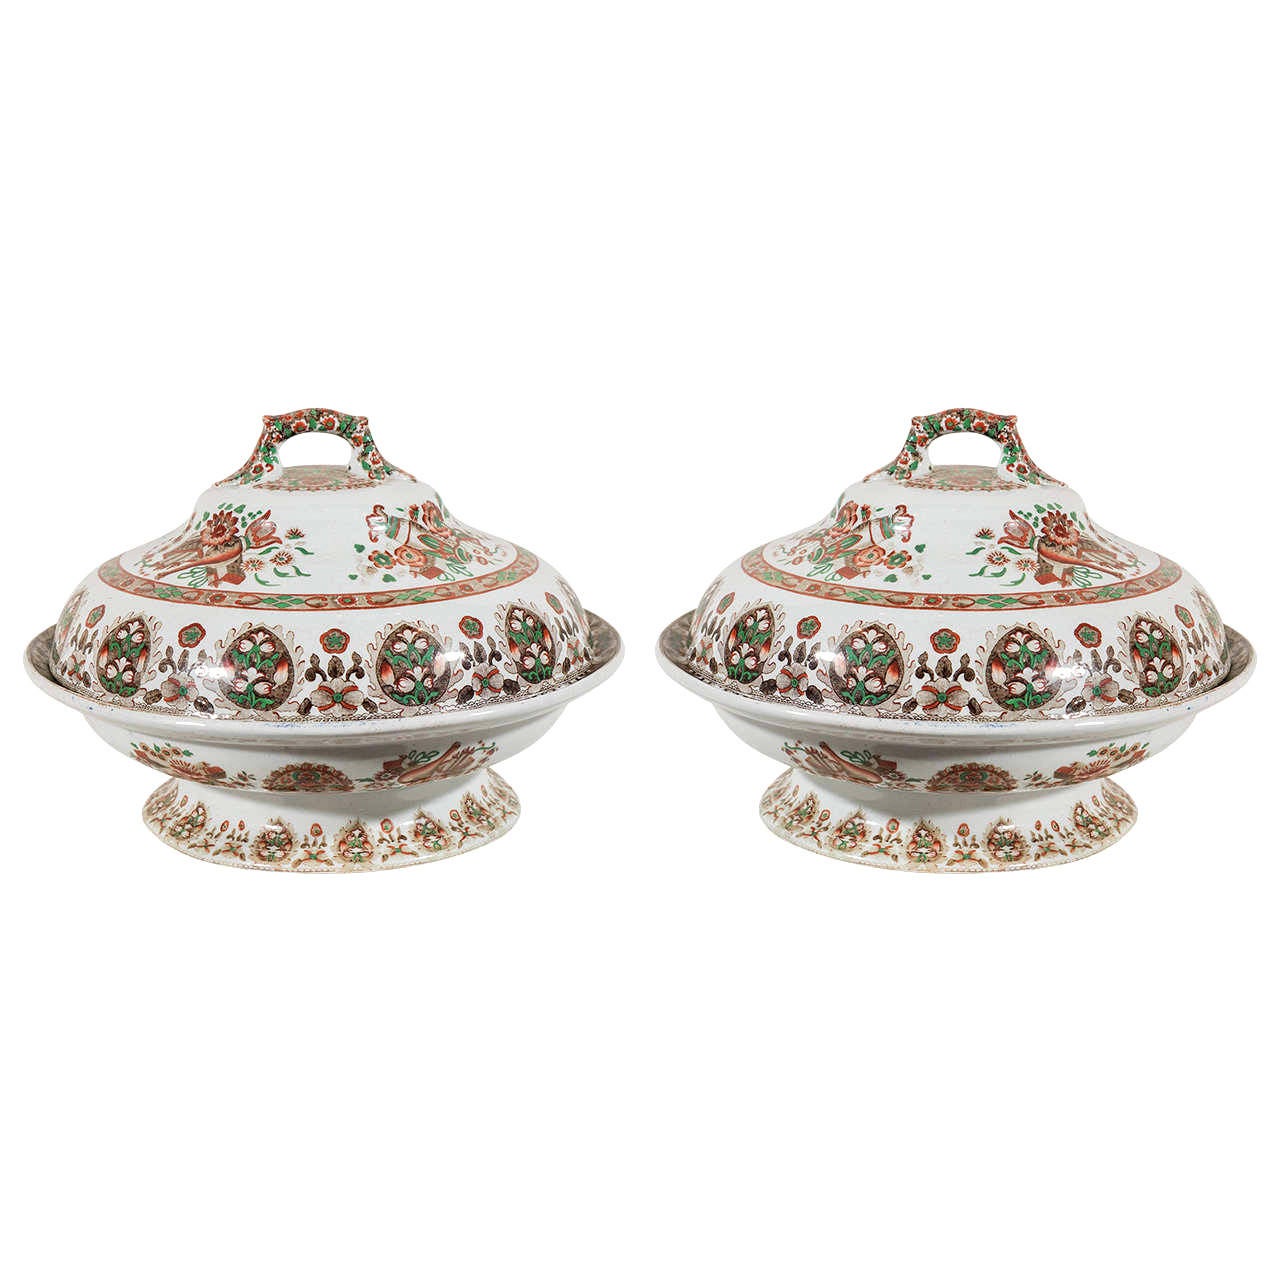 We are pleased to offer this pair of English porcelain tureens painted with a striking chinoiserie decoration. They were made by Copeland Spode circa 1840. The decoration on these tureens is a combination of medallions, flowers and auspicious